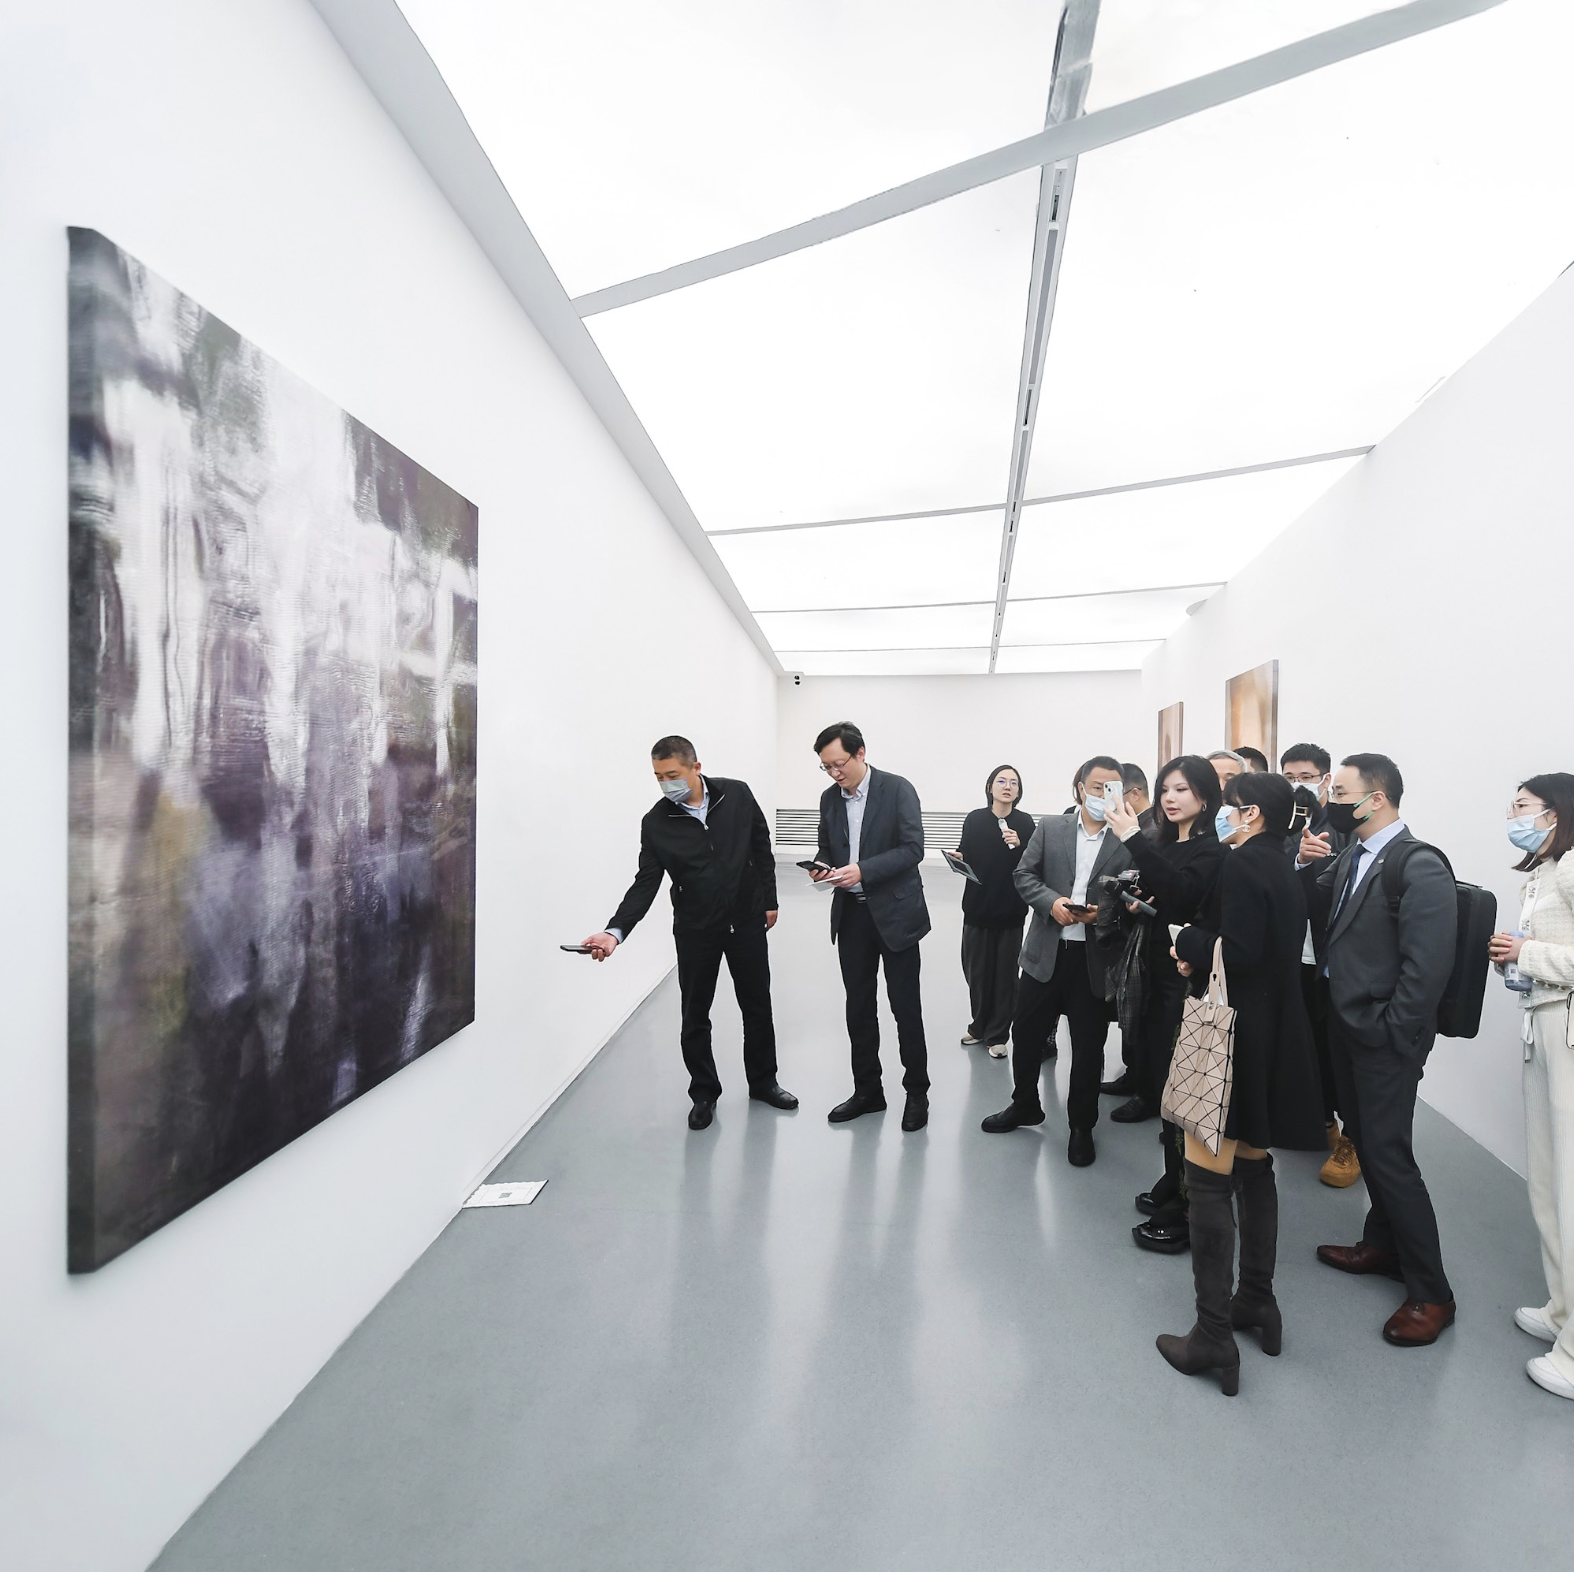 Vue d’exposition, “Perfect Partner in the Near Future”, Yuelai Art Museum, Chongqing, Chine, 2022.